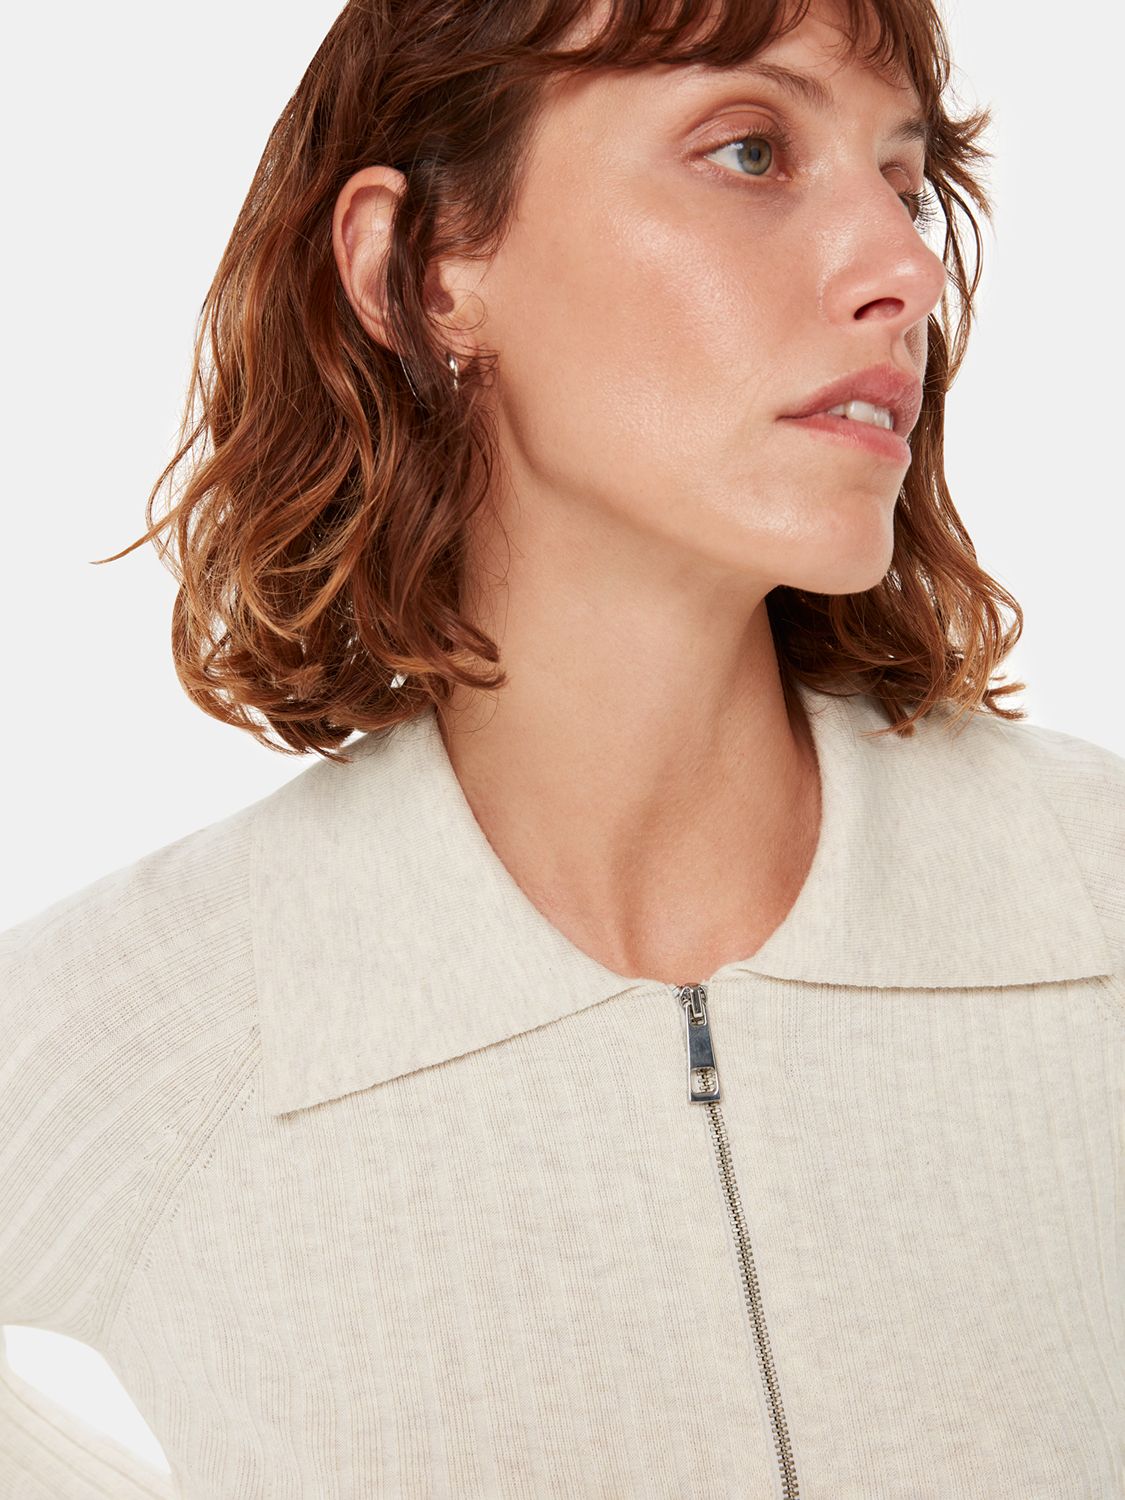 Buy Whistles Zip Polo Knit Jumper Online at johnlewis.com